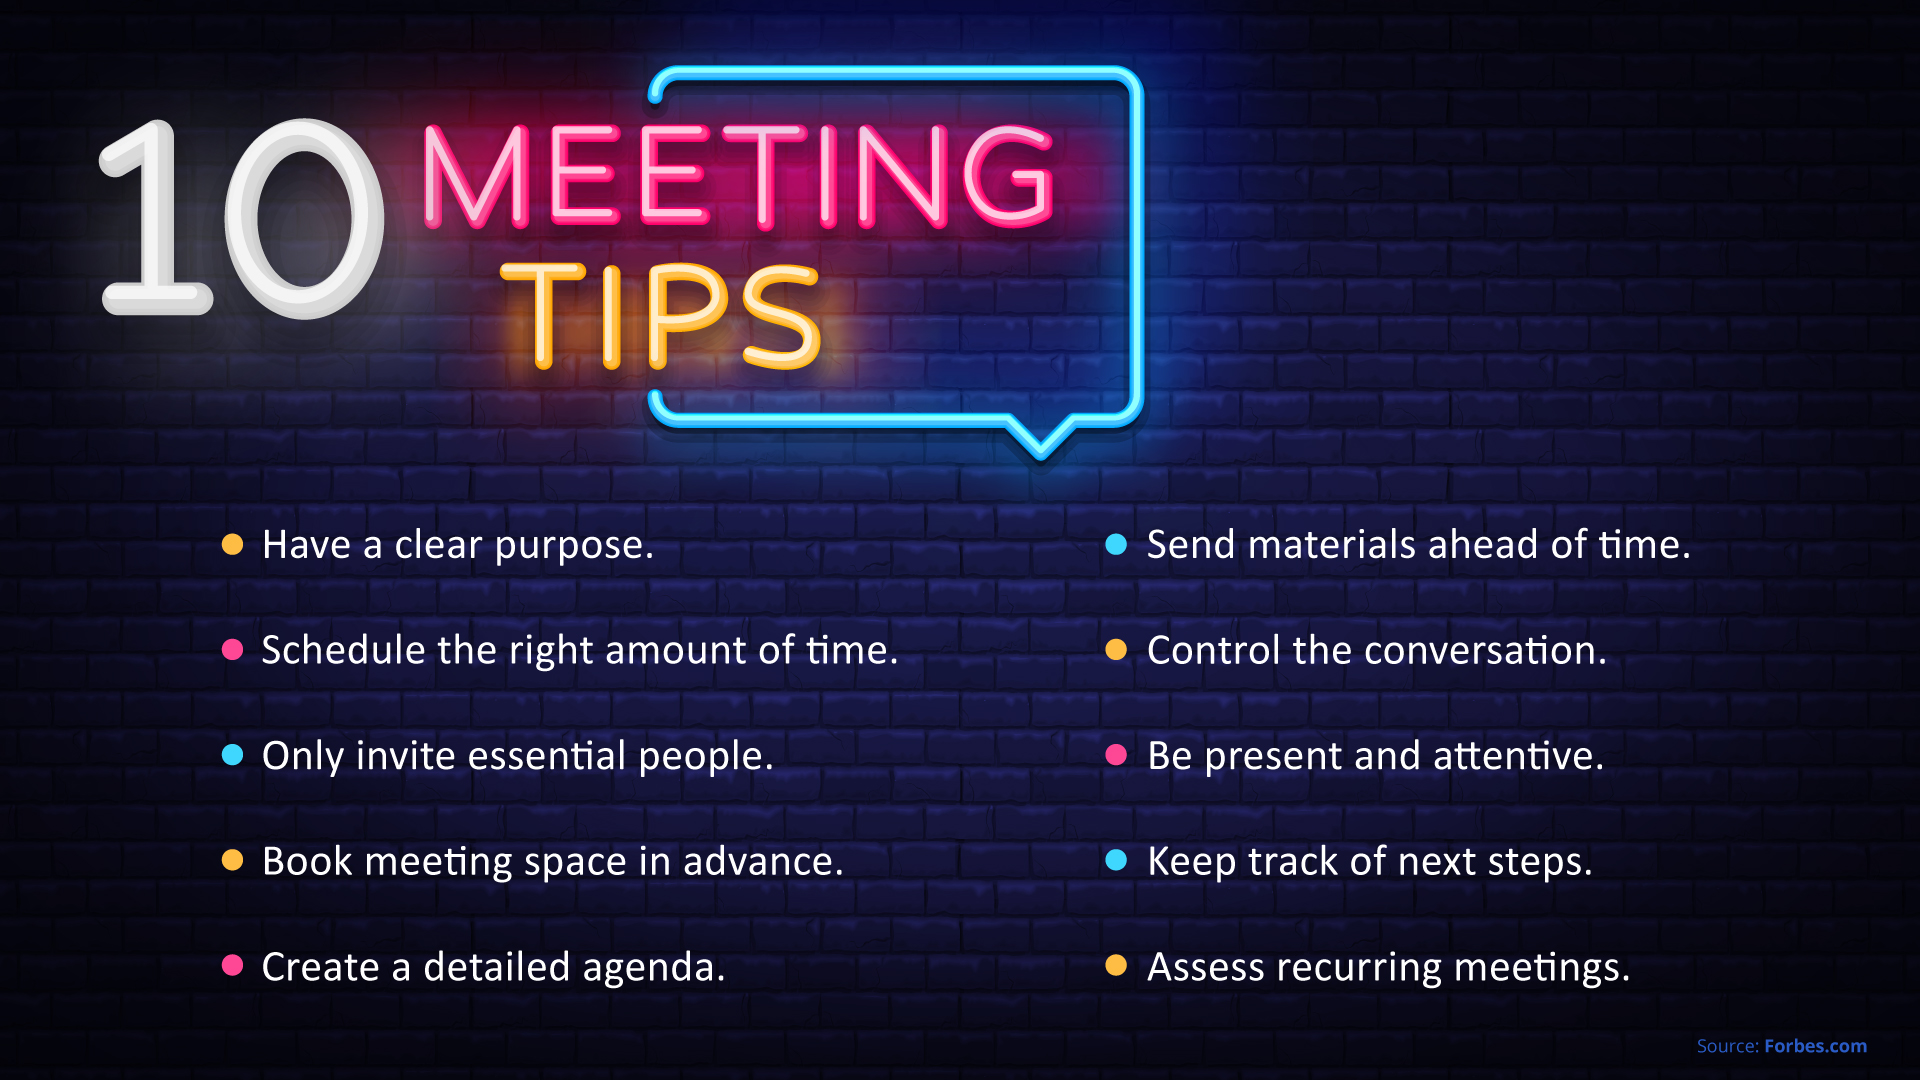 Free Graphic | Meeting Tips | 10 Tips